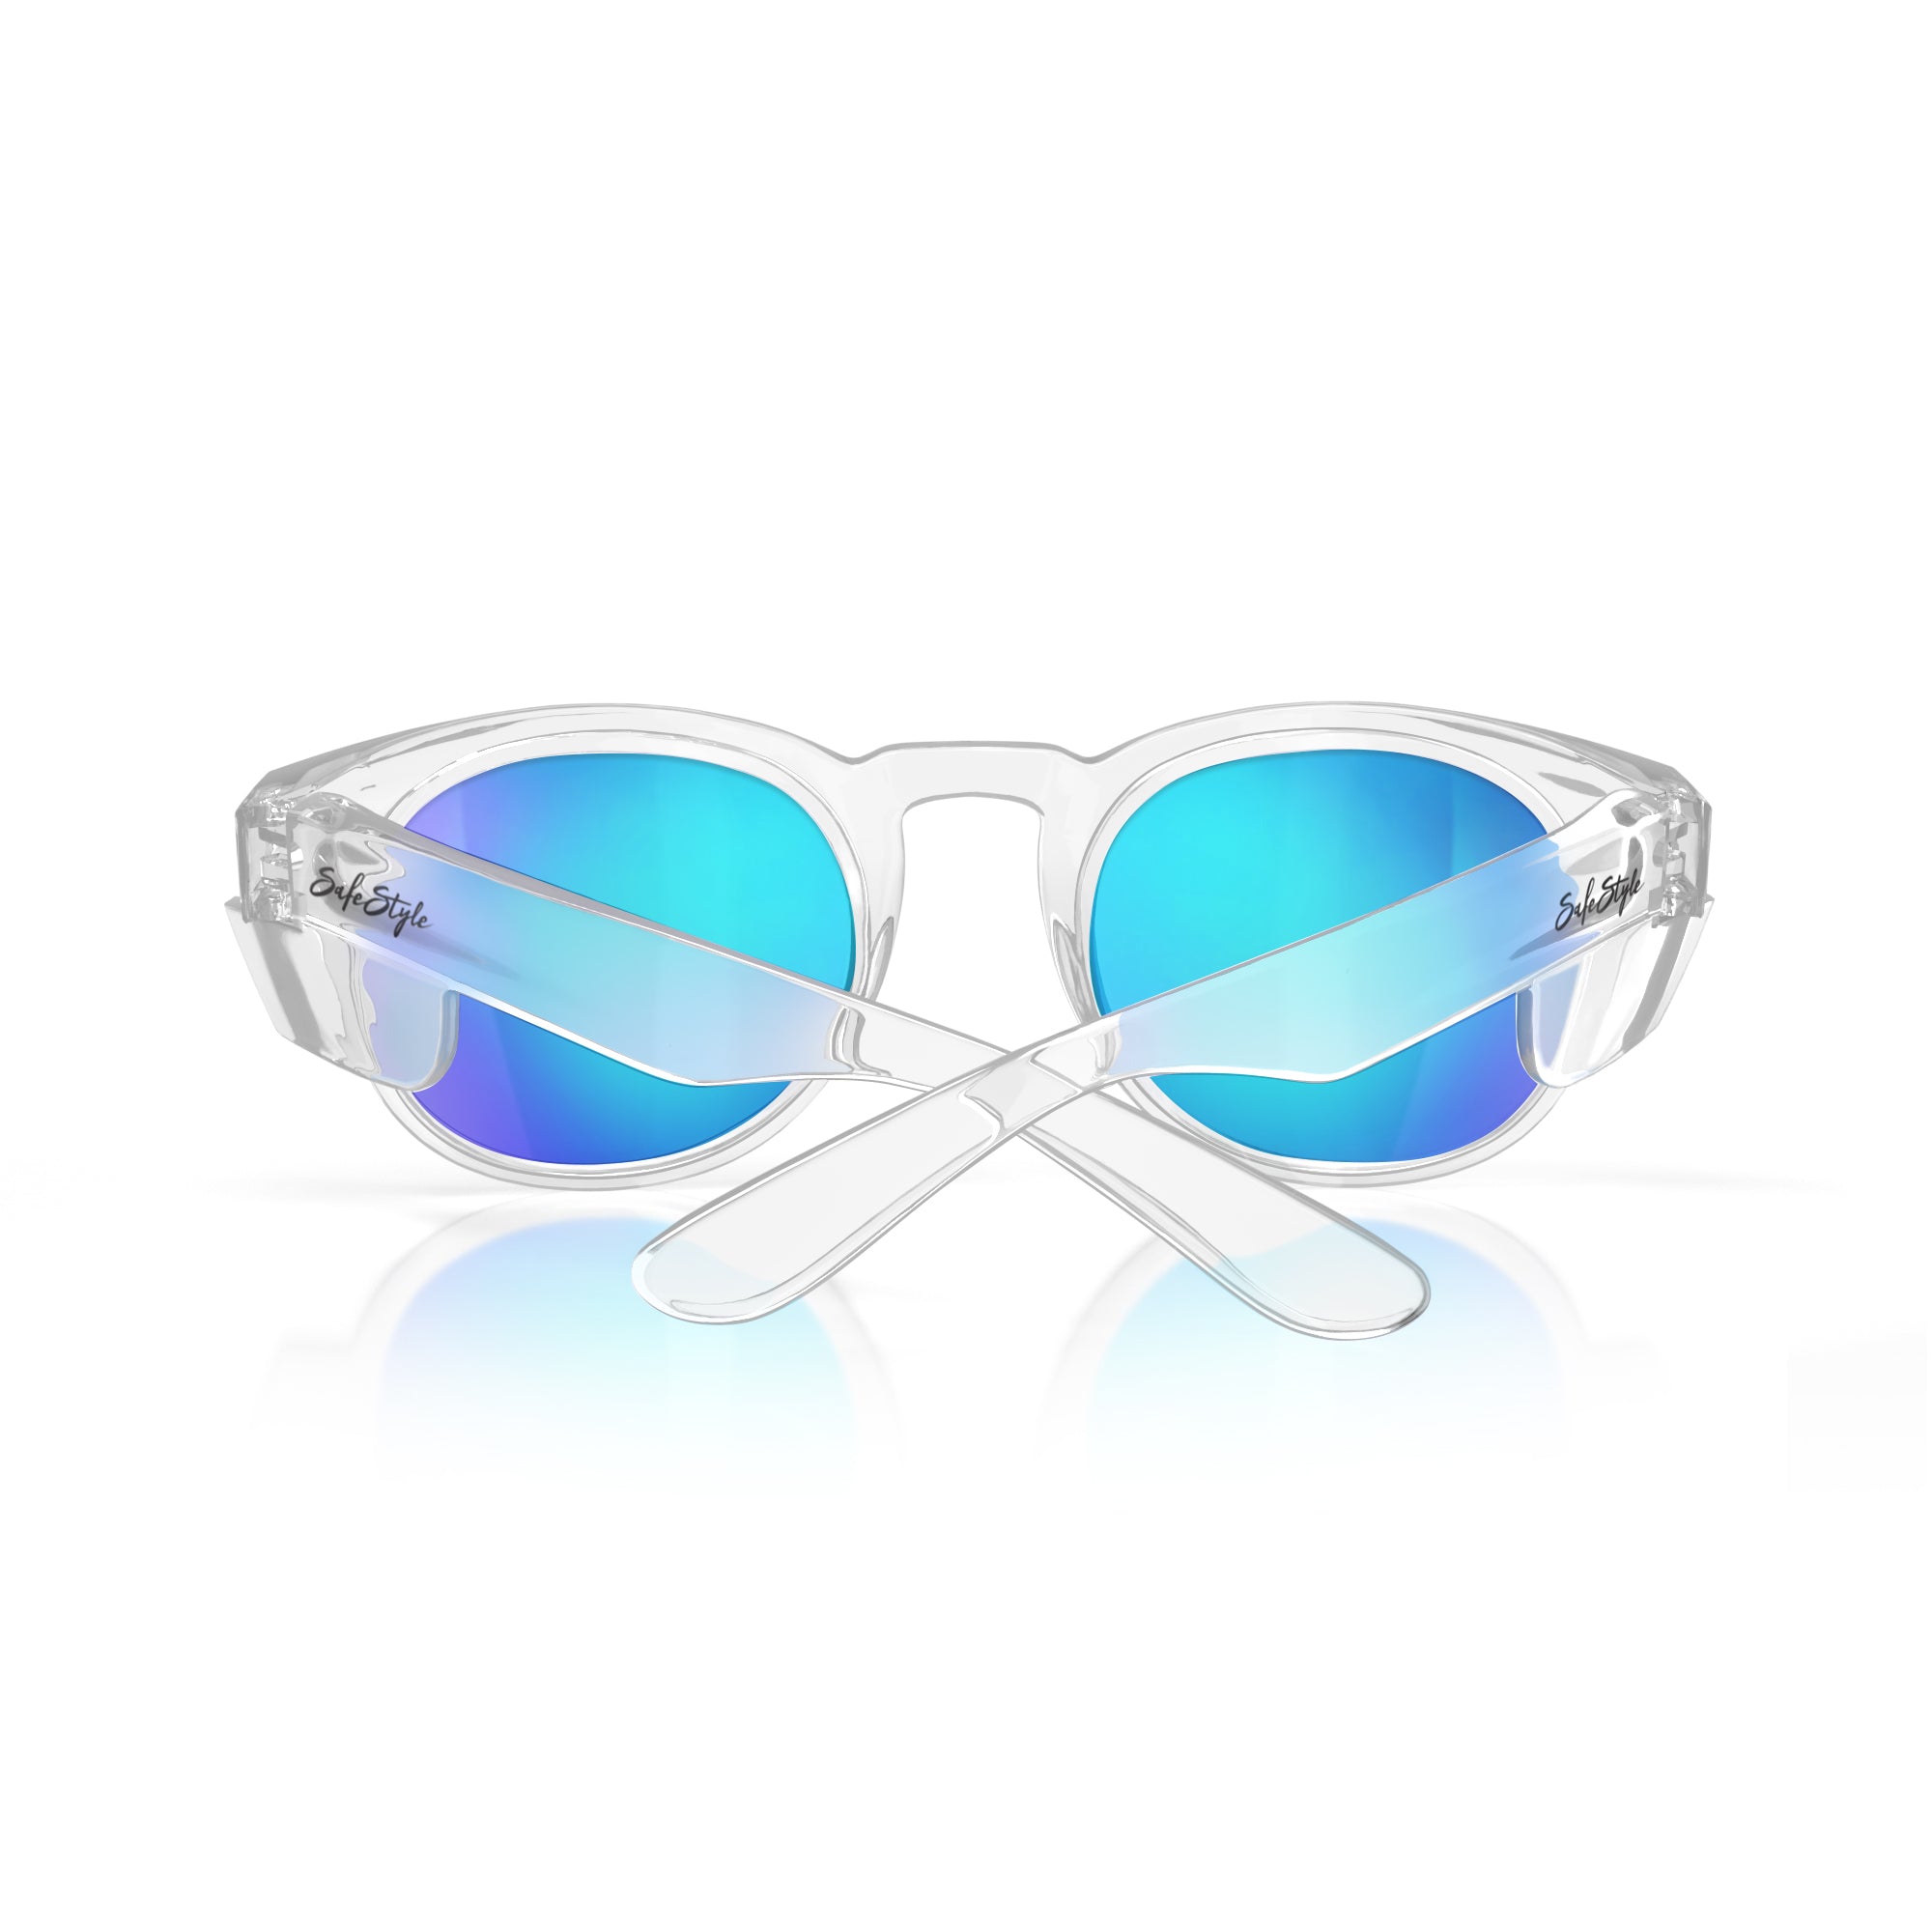 Safestyle - CRCBP100 - Crusiers clear Frame Mirror Blue Polarised Lens